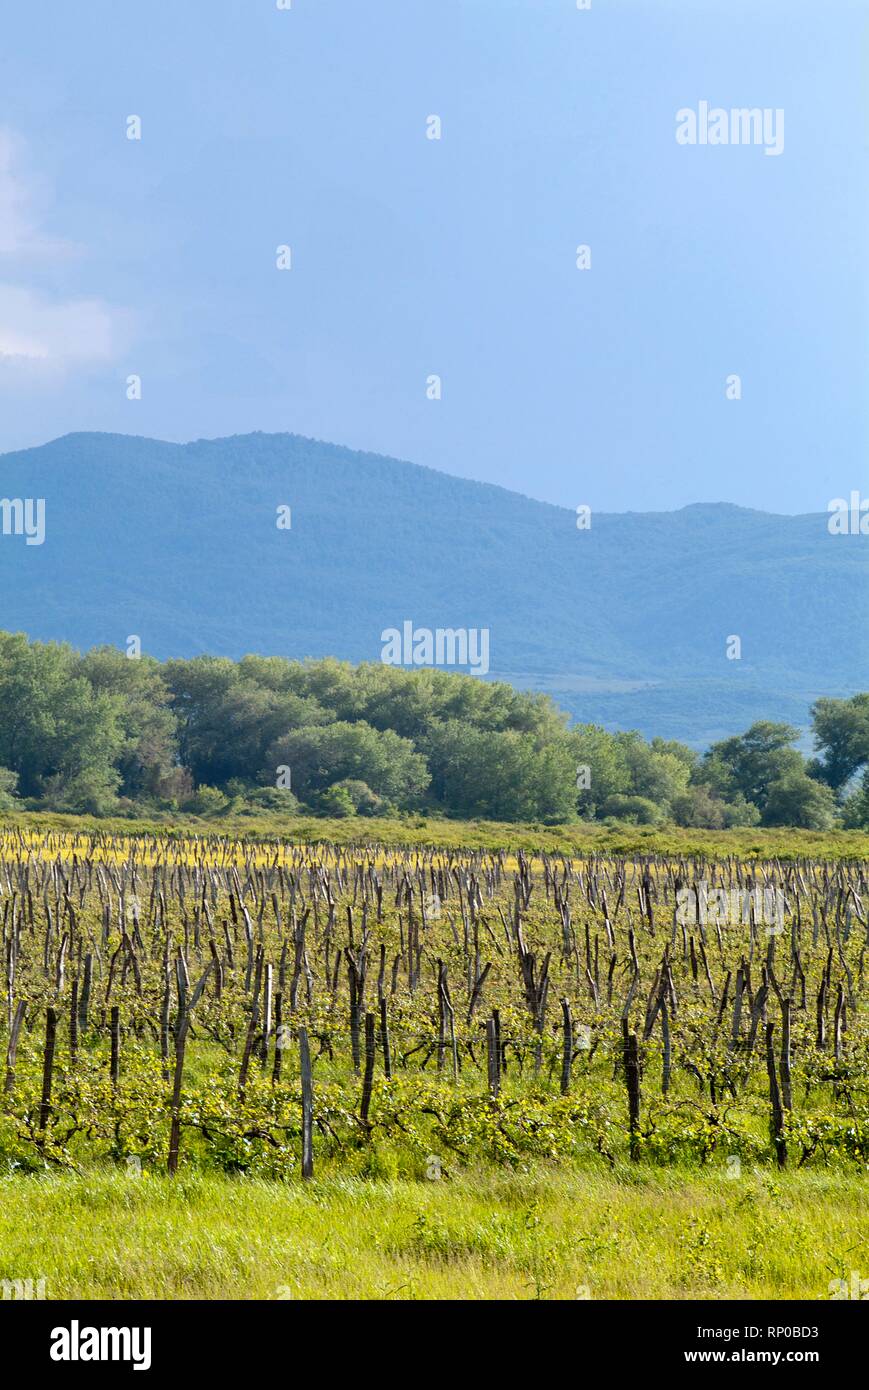 Vineyards in the Kakheti Valley in Georgia. Historians say that wine has been made in the Kakheti Valley - a verdant belly of fertile plains ridged wi Stock Photo